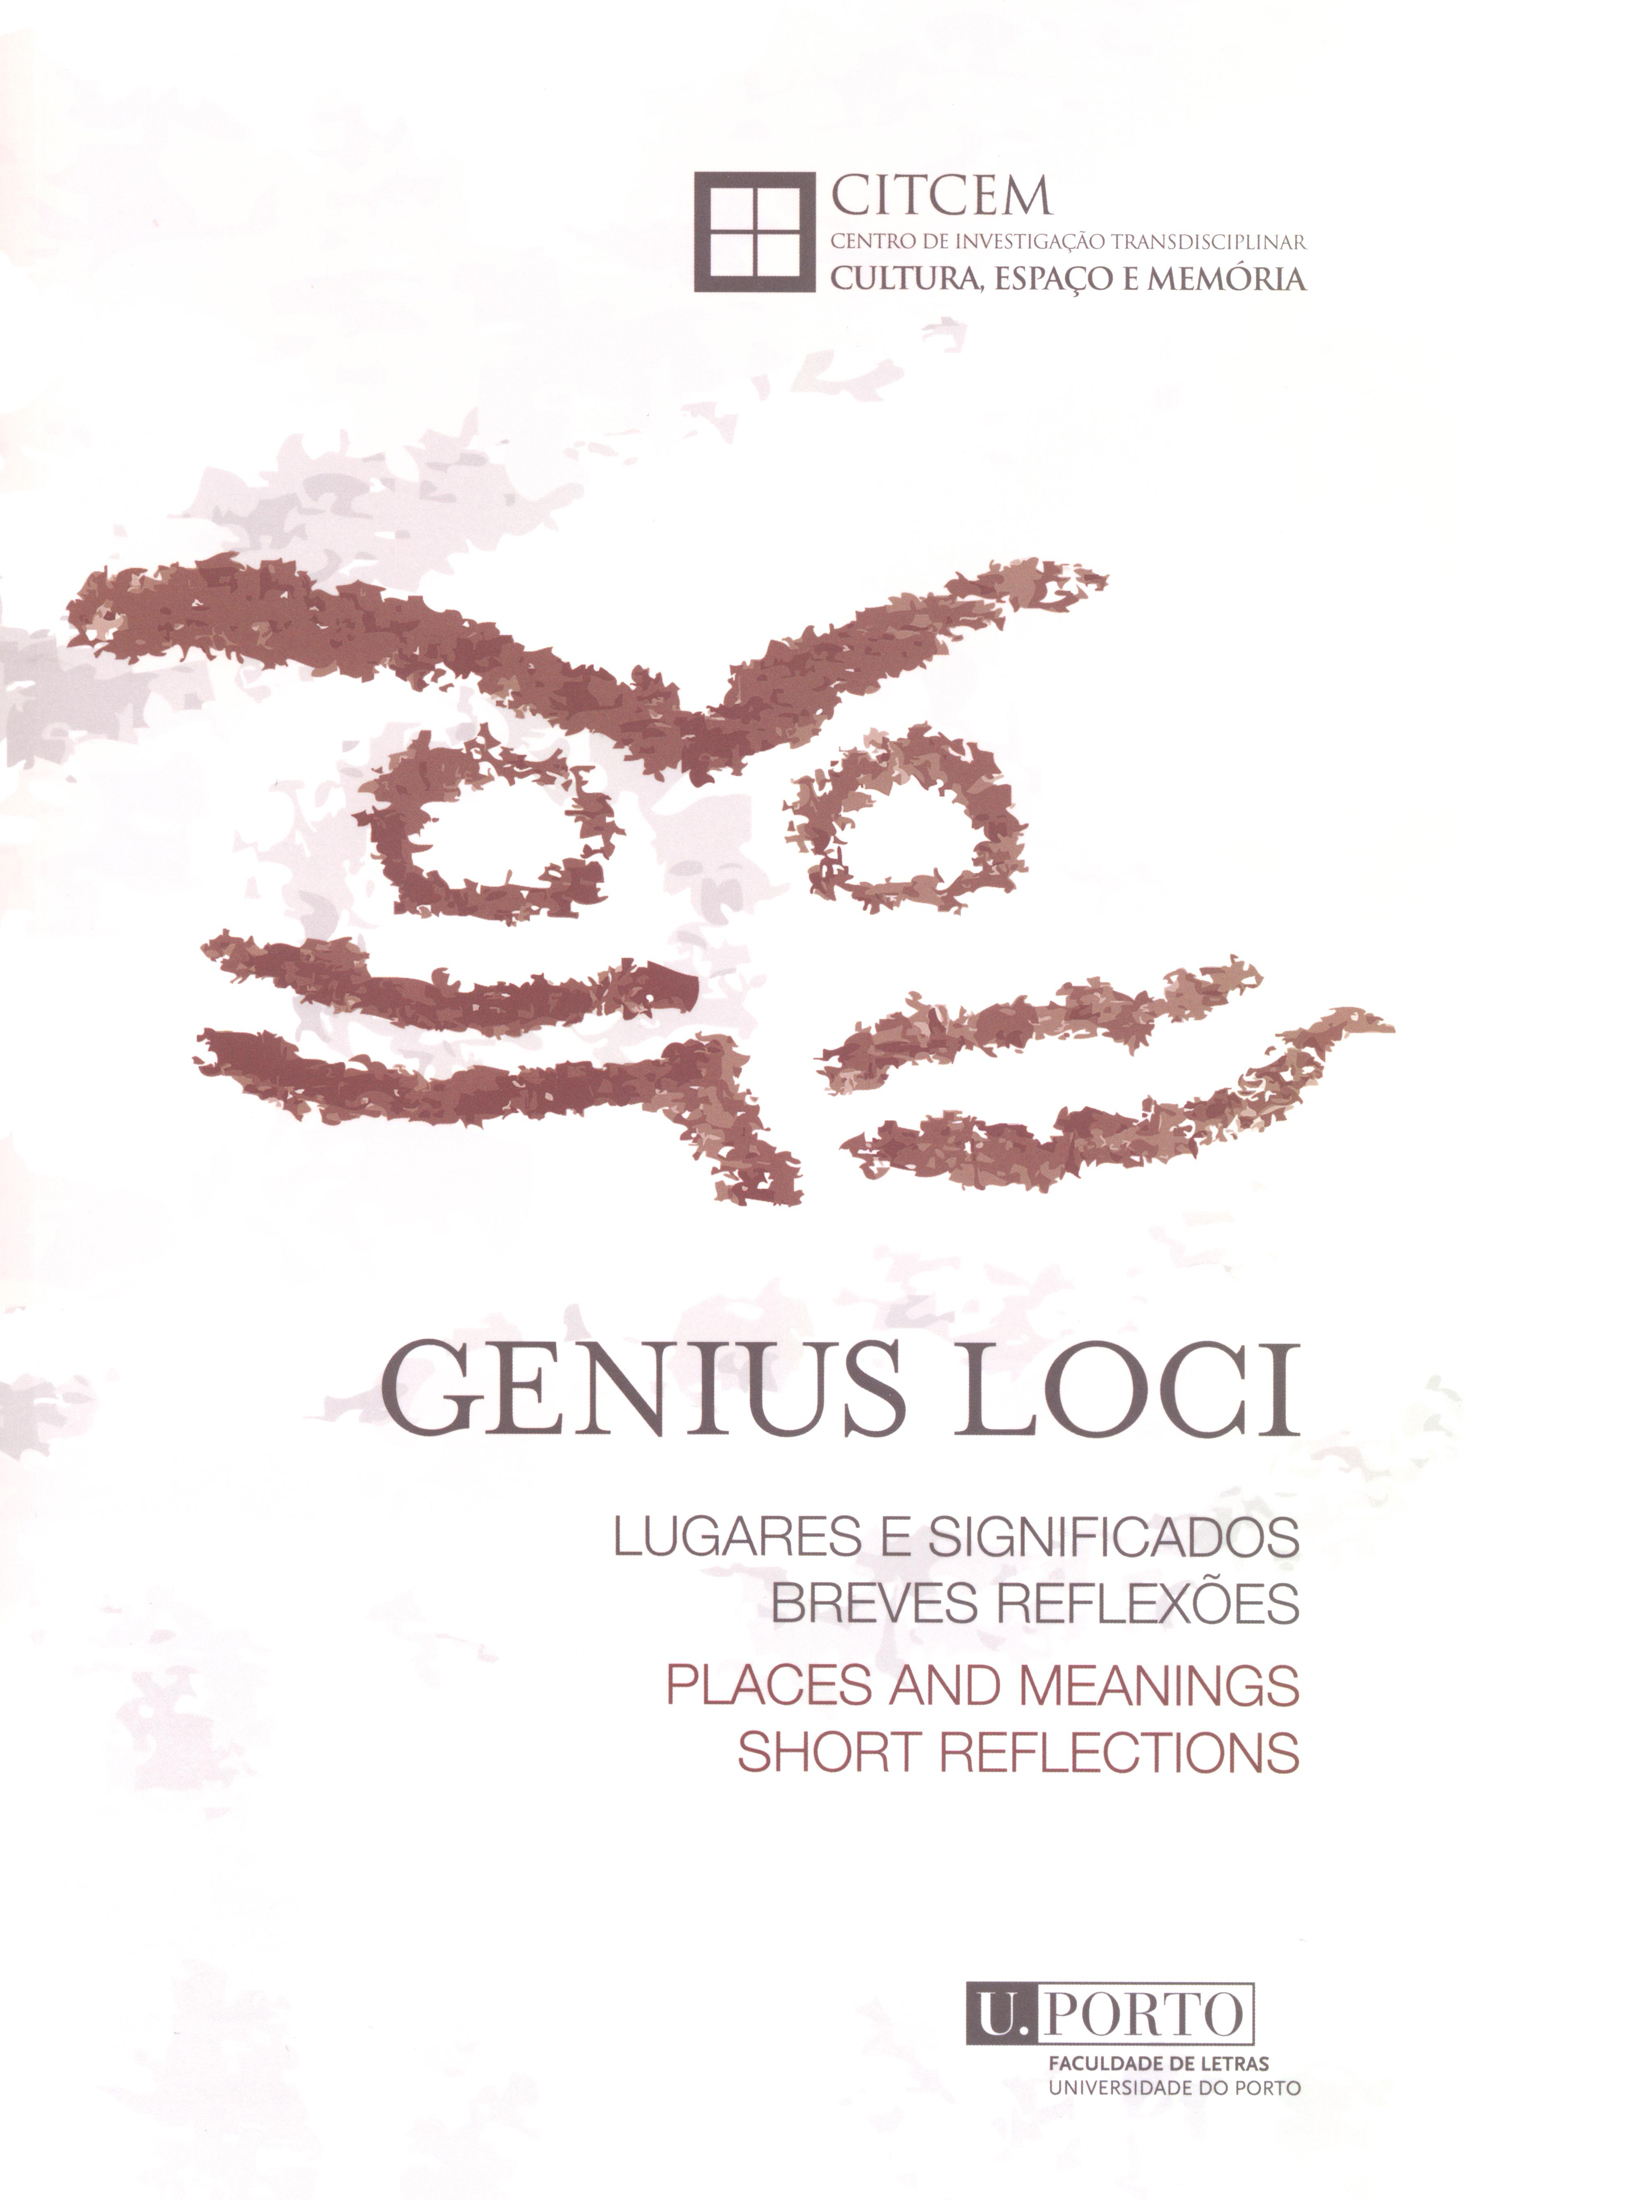 International Conference Genius Loci, places and meanings